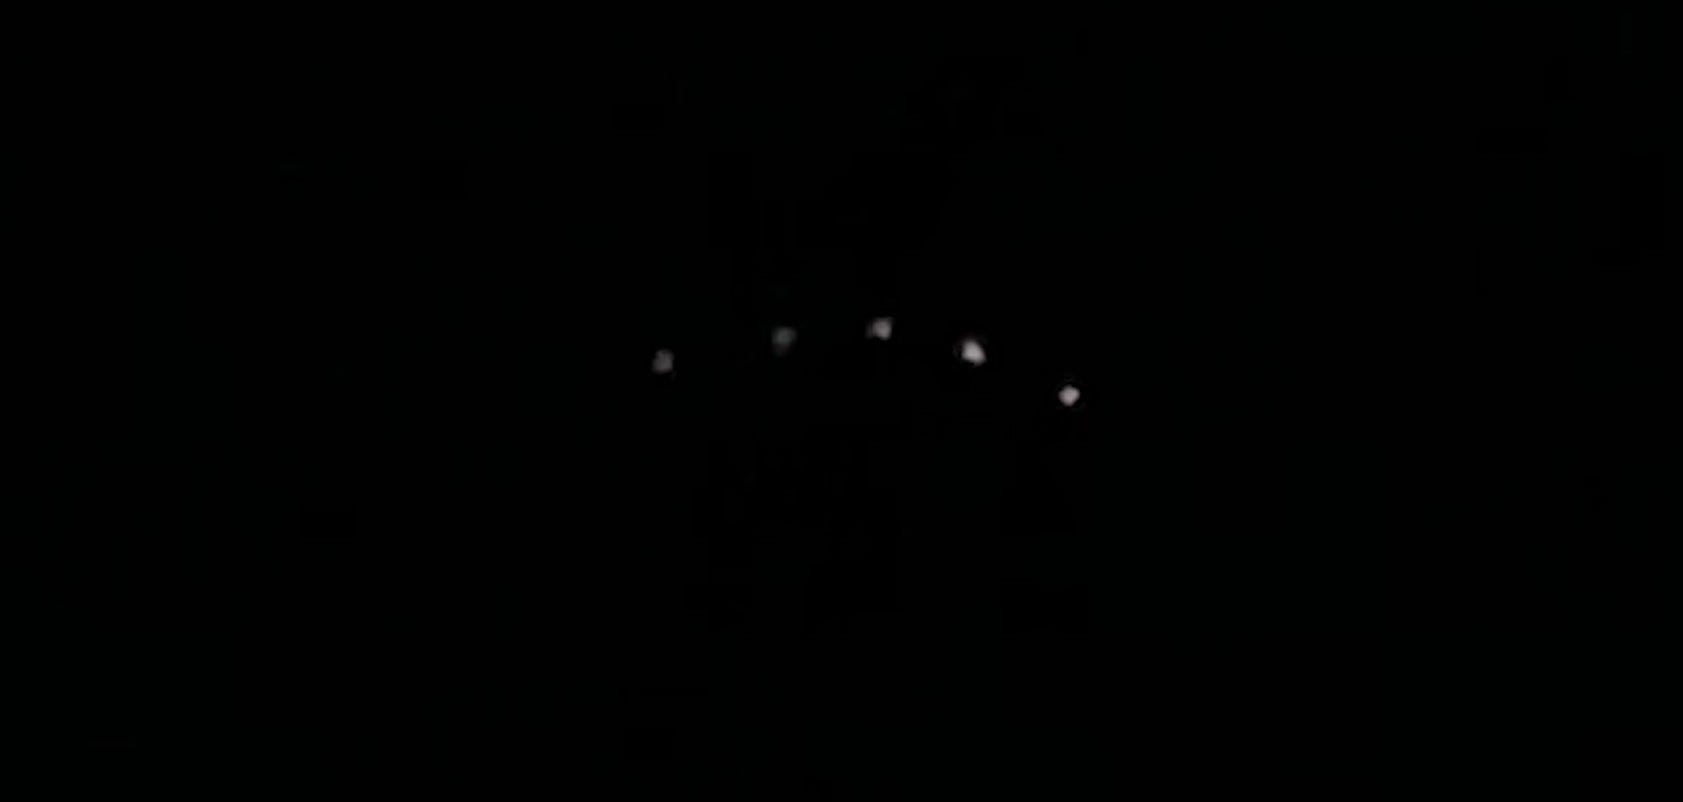 Mass UFOs Spotted on Camera in California